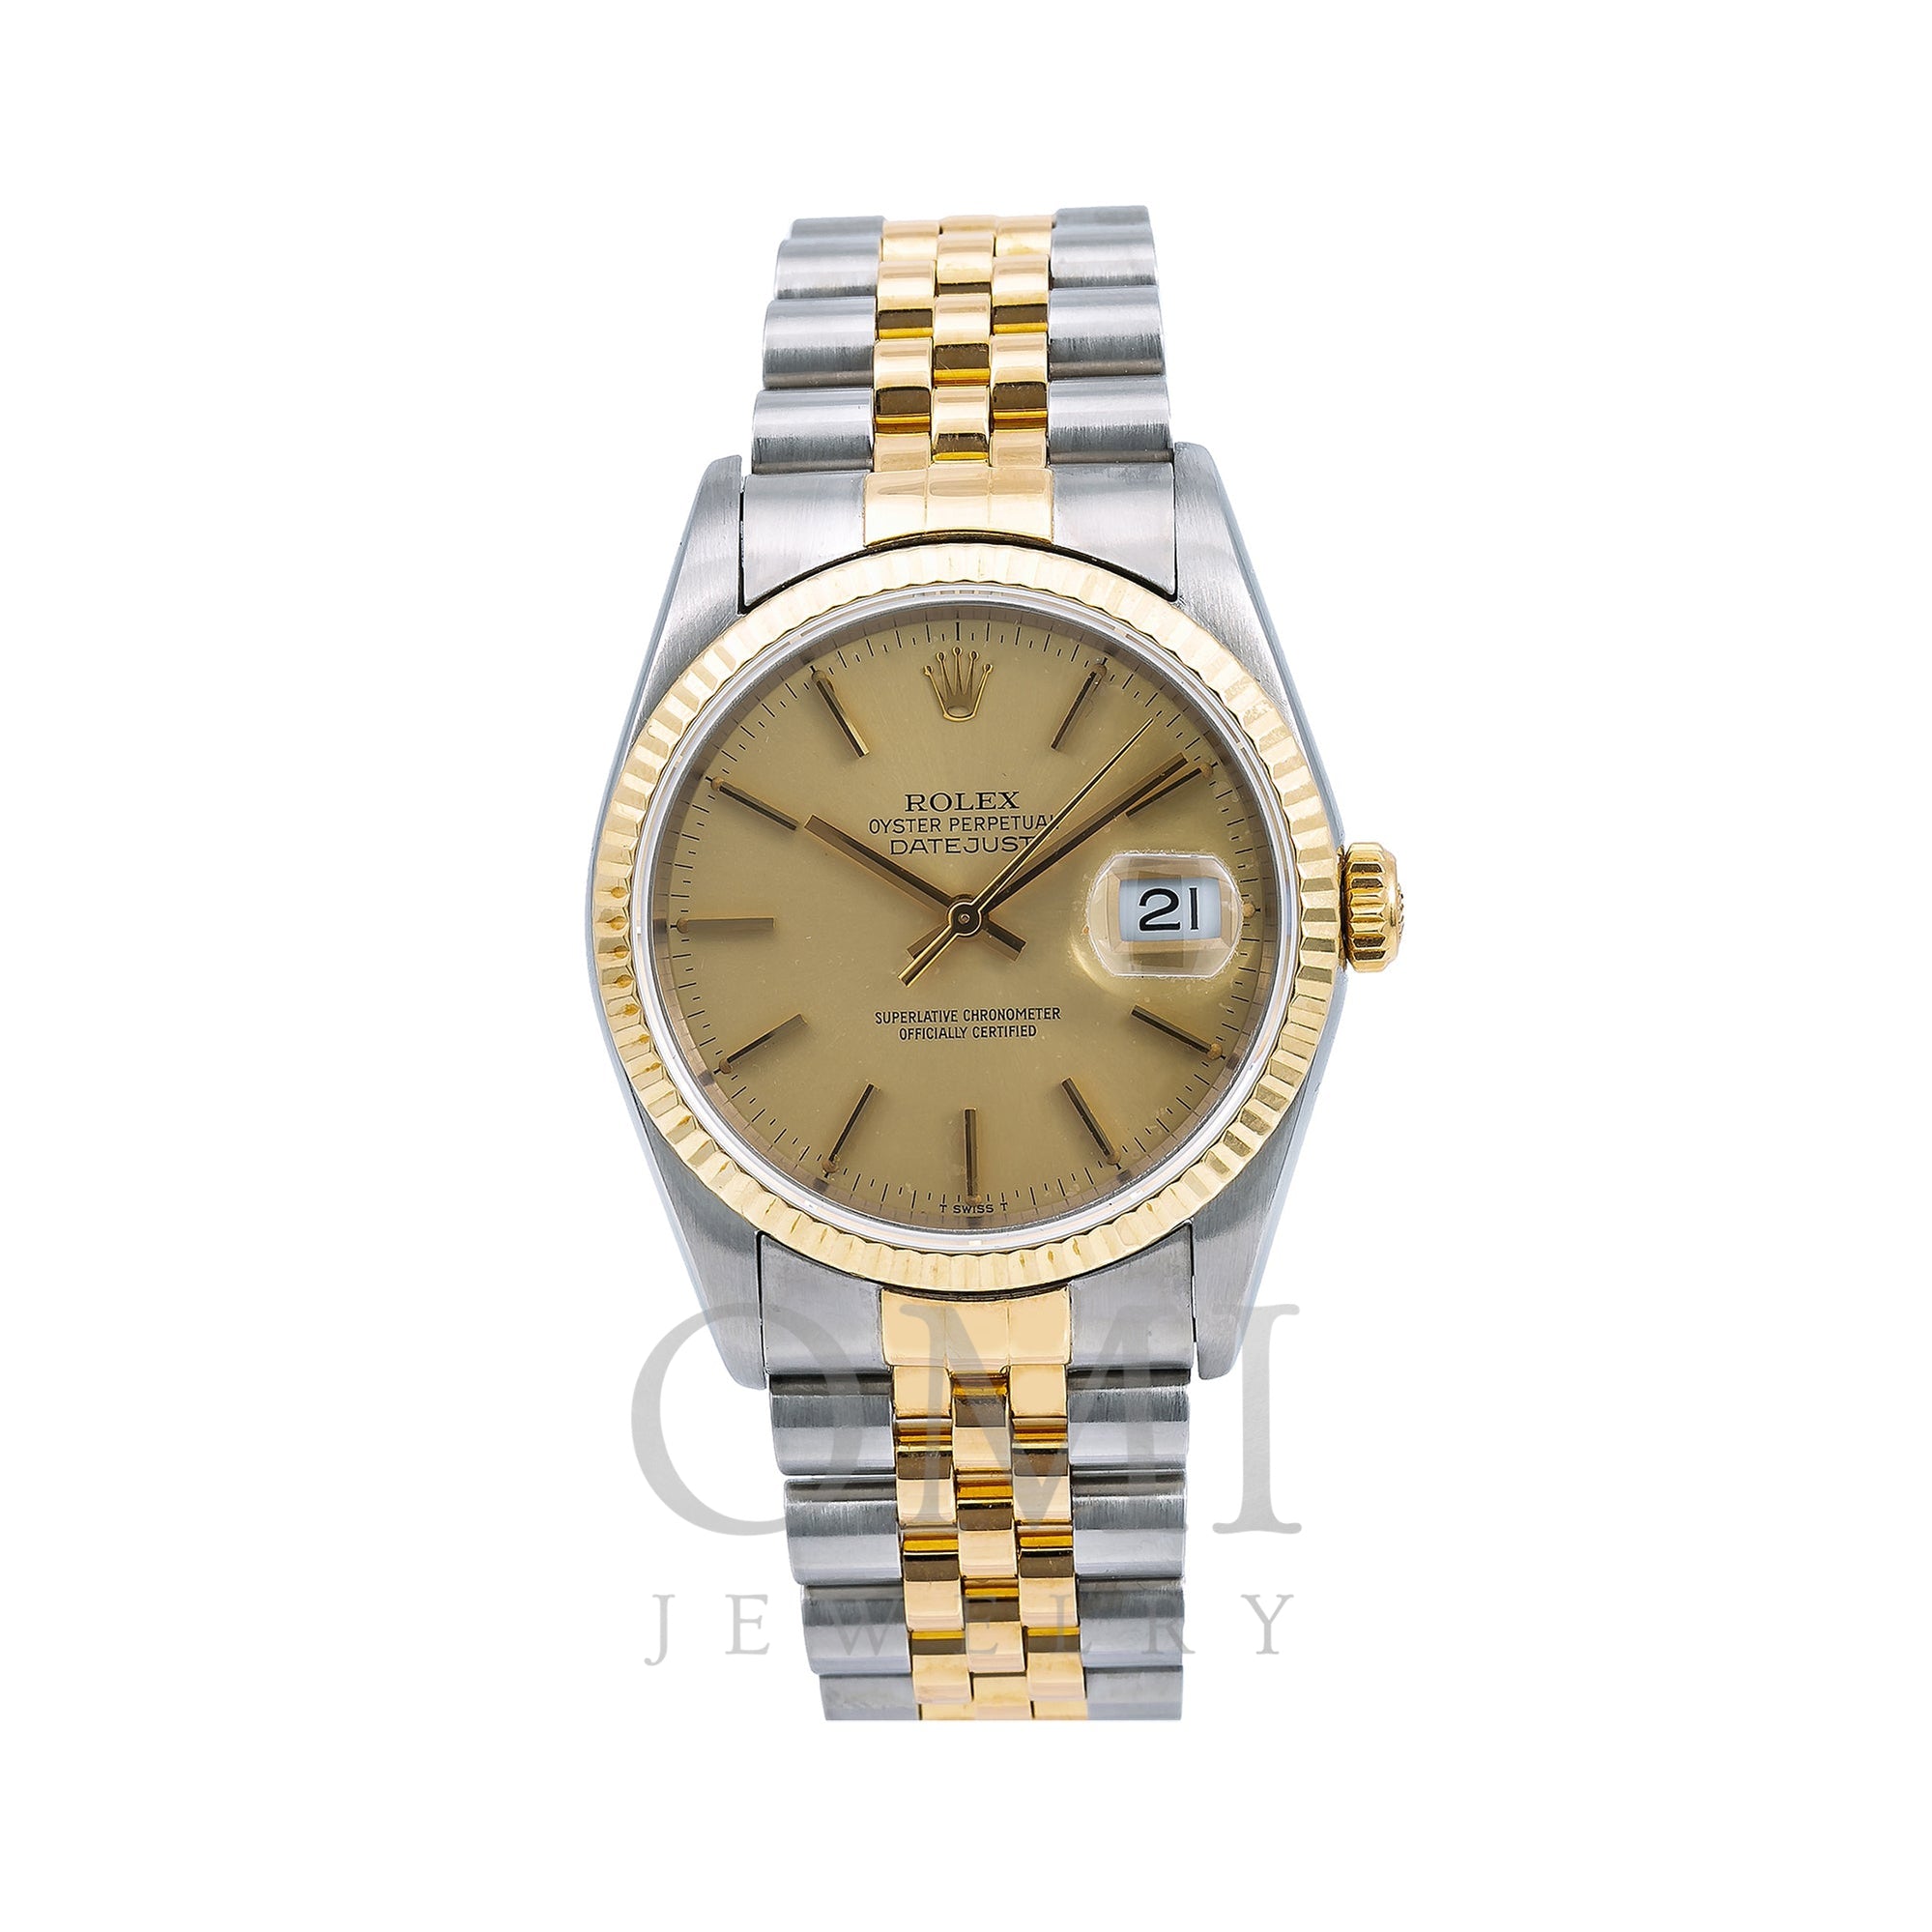 Rolex Datejust 36mm 18k Yellow Gold  Steel Jubilee Bracelet for  Rs591069 for sale from a Trusted Seller on Chrono24